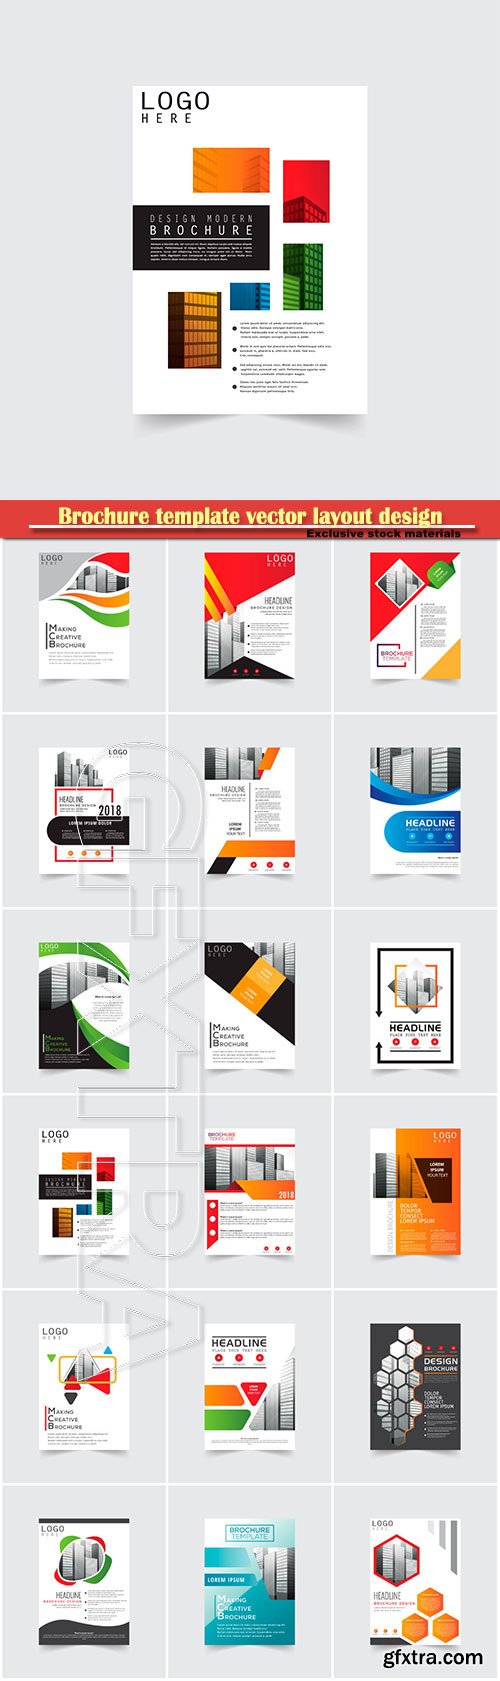 Brochure template vector layout design, corporate business annual report, magazine, flyer mockup # 148